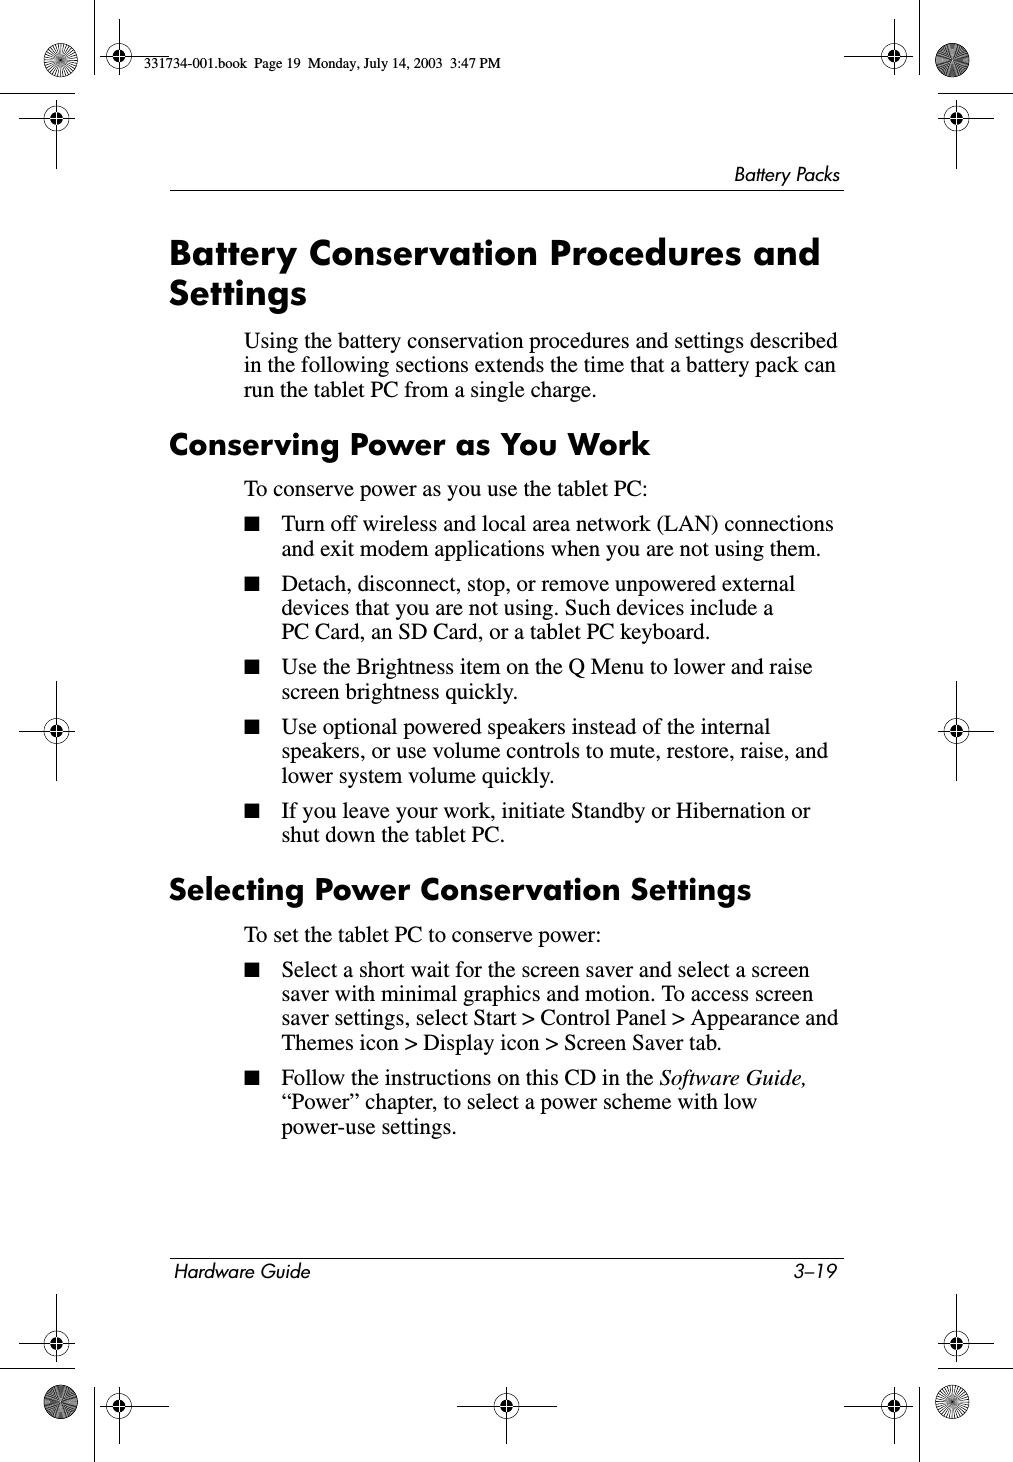 Battery PacksHardware Guide 3–19Battery Conservation Procedures and SettingsUsing the battery conservation procedures and settings described in the following sections extends the time that a battery pack can run the tablet PC from a single charge.Conserving Power as You WorkTo conserve power as you use the tablet PC:■Turn off wireless and local area network (LAN) connections and exit modem applications when you are not using them.■Detach, disconnect, stop, or remove unpowered external devices that you are not using. Such devices include a PC Card, an SD Card, or a tablet PC keyboard.■Use the Brightness item on the Q Menu to lower and raise screen brightness quickly.■Use optional powered speakers instead of the internal speakers, or use volume controls to mute, restore, raise, and lower system volume quickly.■If you leave your work, initiate Standby or Hibernation or shut down the tablet PC.Selecting Power Conservation SettingsTo set the tablet PC to conserve power:■Select a short wait for the screen saver and select a screen saver with minimal graphics and motion. To access screen saver settings, select Start &gt; Control Panel &gt; Appearance and Themes icon &gt; Display icon &gt; Screen Saver tab.■Follow the instructions on this CD in the Software Guide, “Power” chapter, to select a power scheme with low power-use settings.331734-001.book  Page 19  Monday, July 14, 2003  3:47 PM